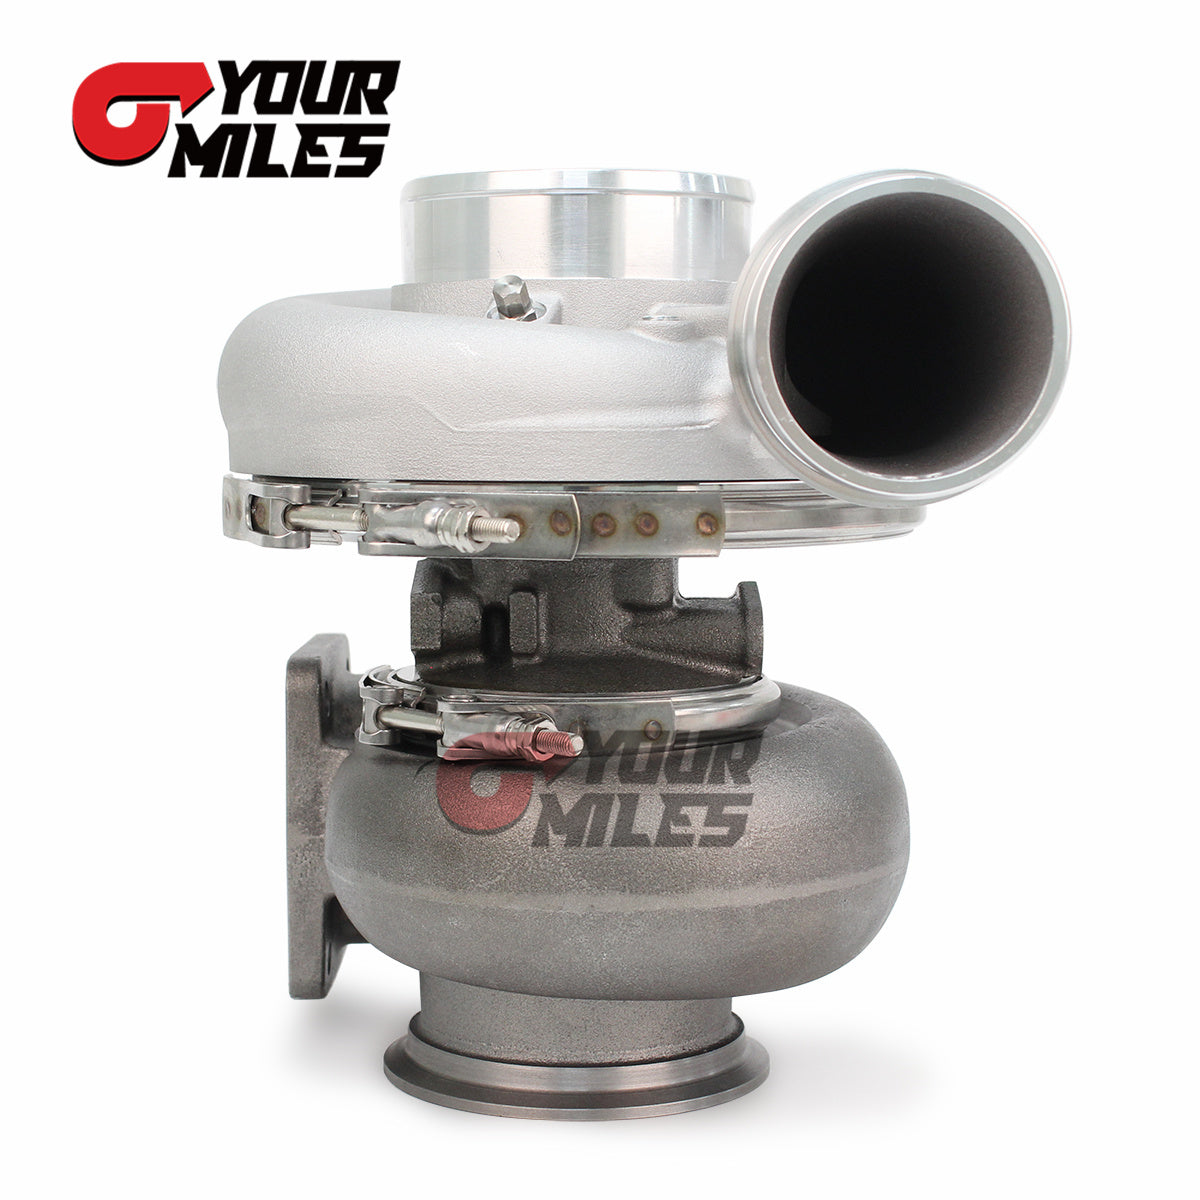 Yourmiles G42-1200 Compact 73mm Journal Bearing TurboCharger T4 1.15/1.25 0.85/1.01/1.15/1.28 Dual V-band Housing